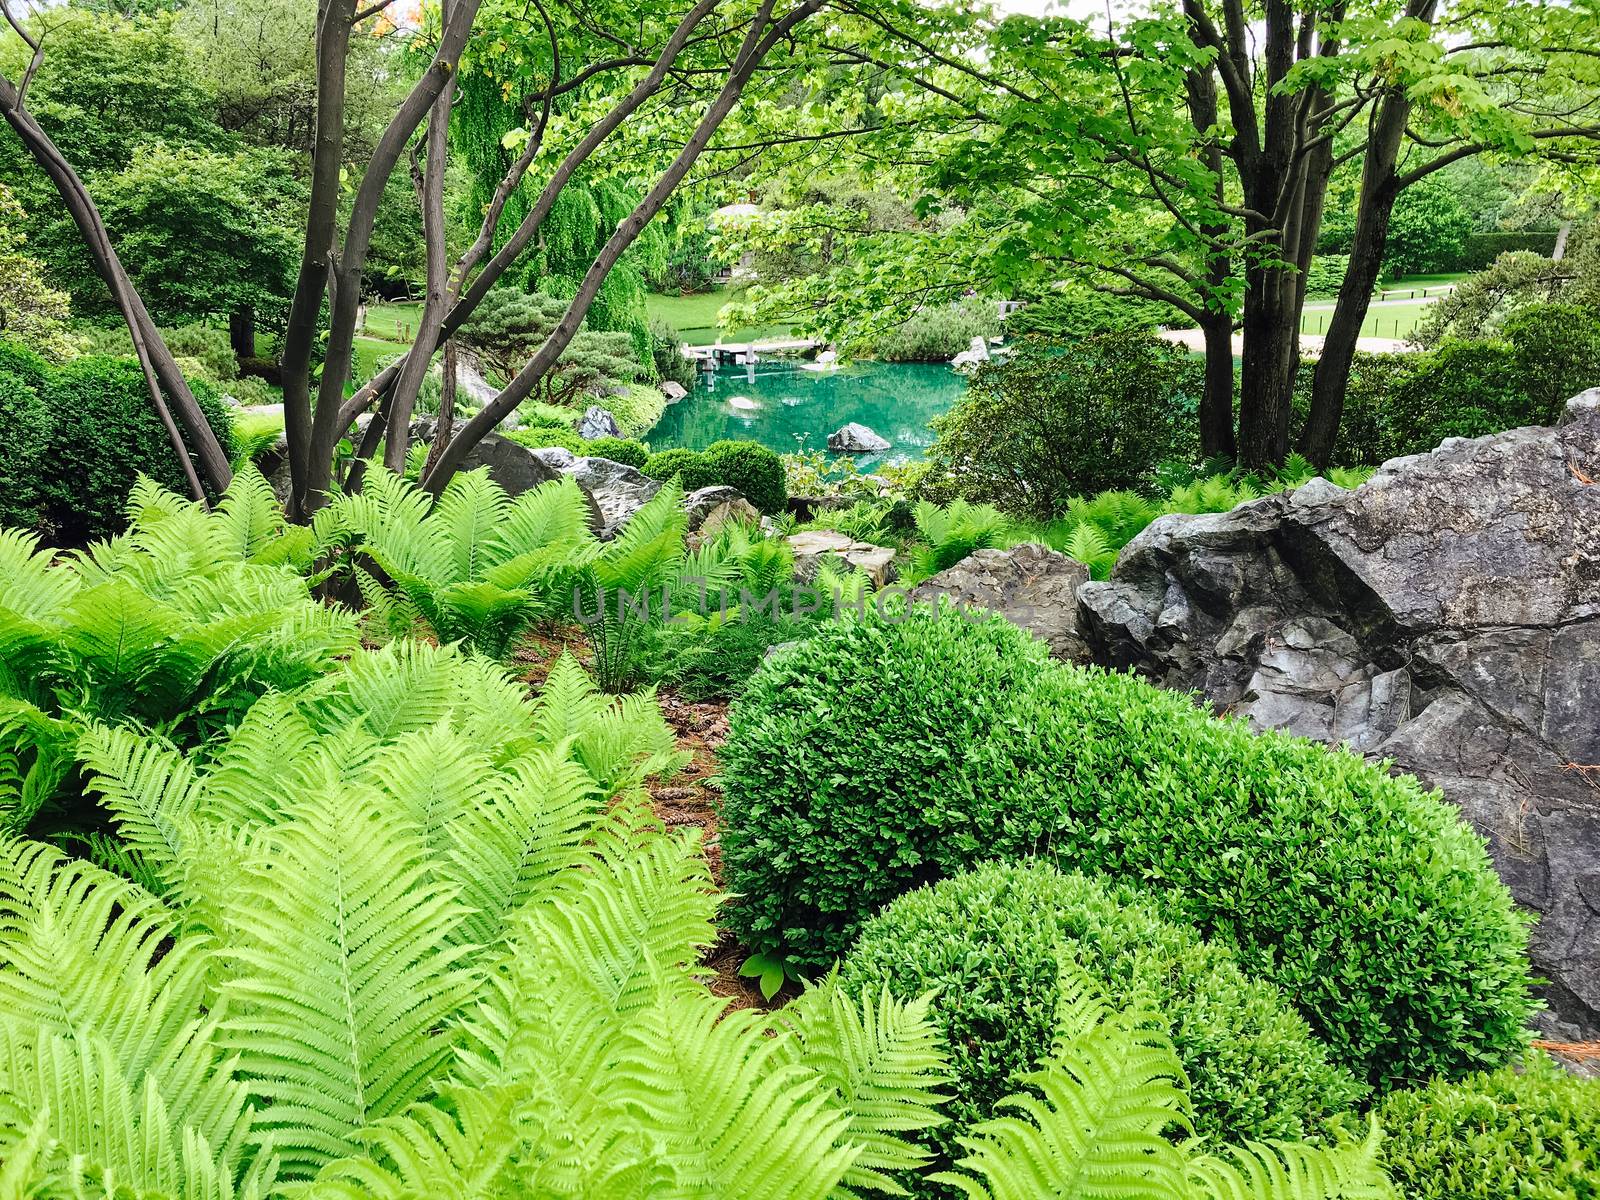 Fern growing in a beautiful green garden with a turquoise pond.